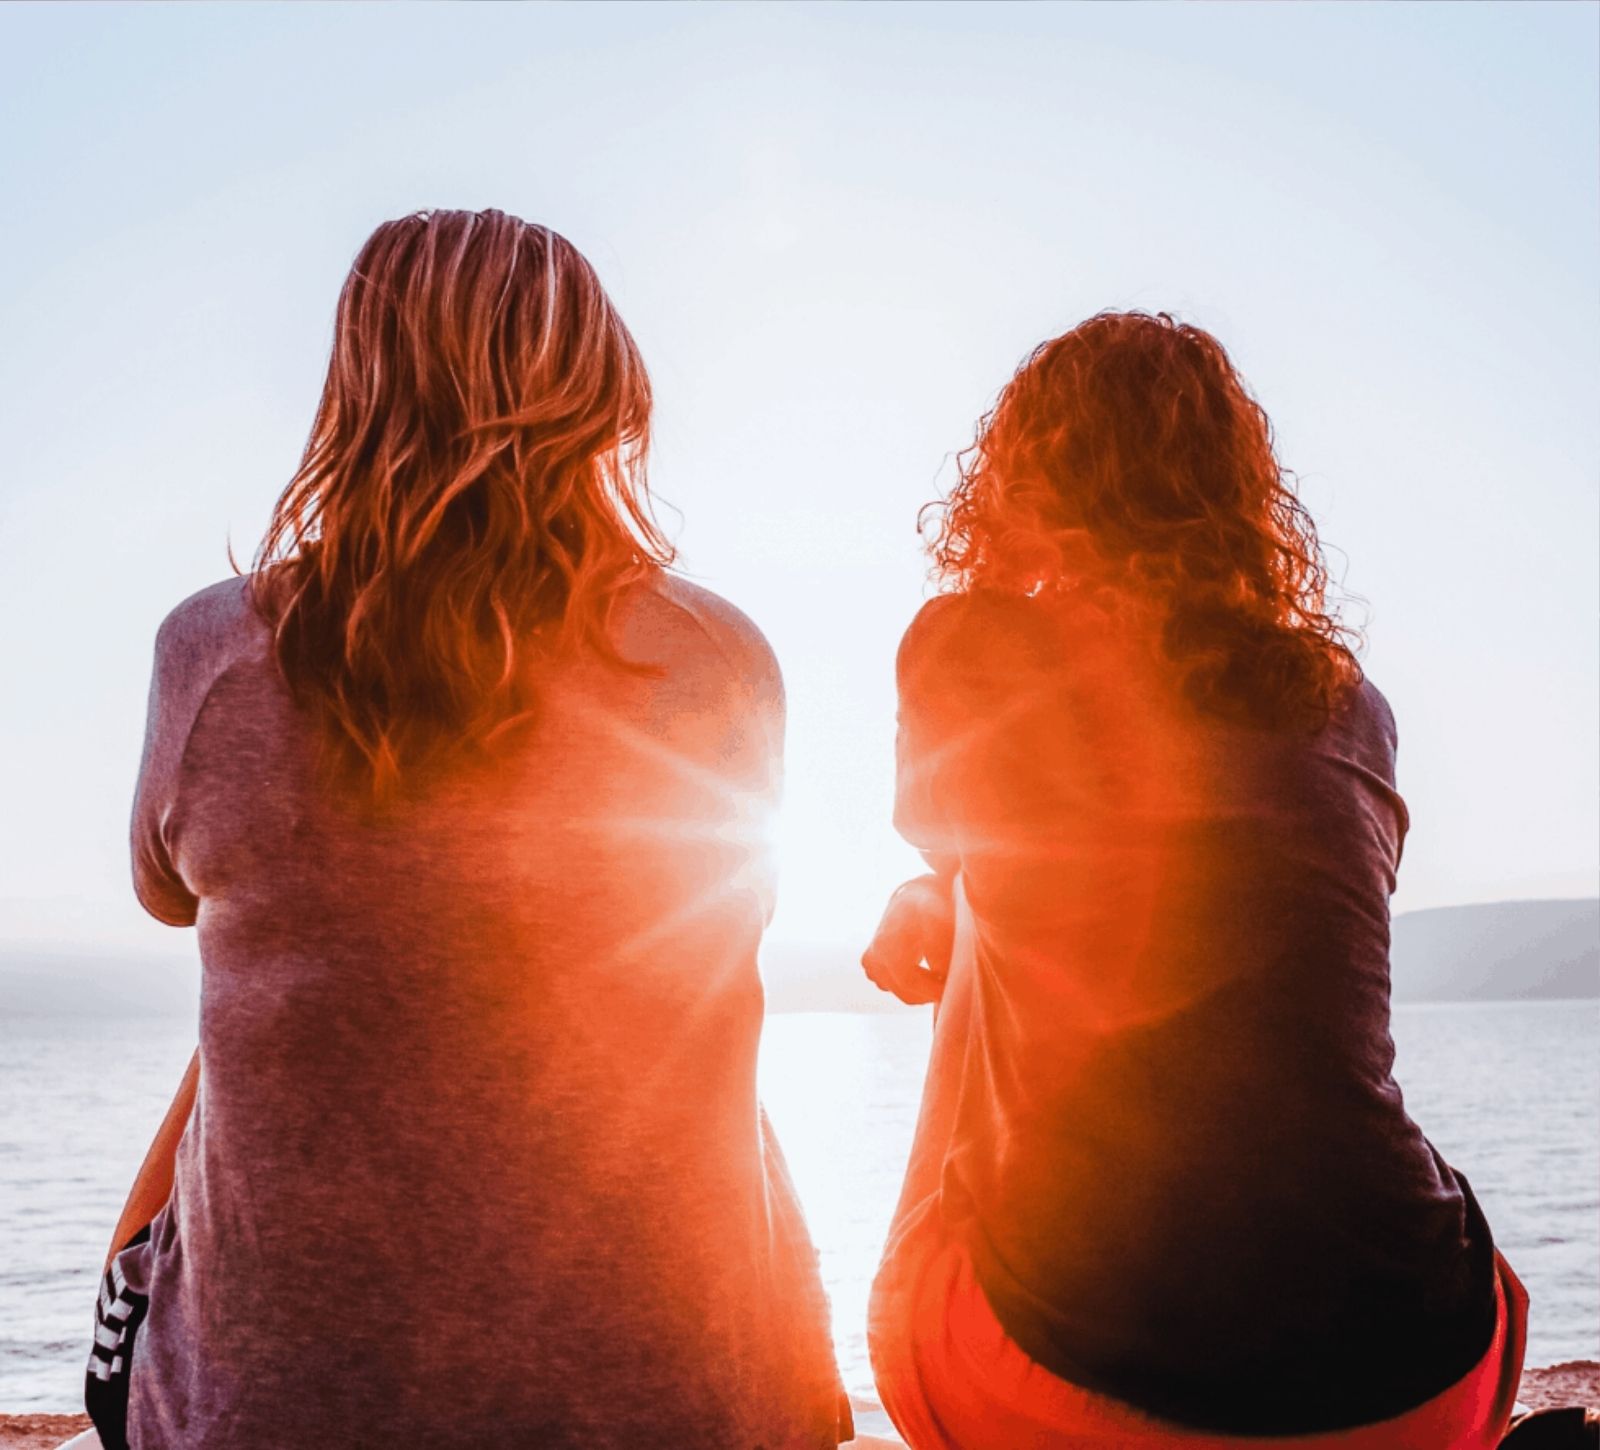 A Letter to my mom-mother's day letter - motherless daughters - women sitting in sunset - mom and daughter - heartfelt letter -letter to deceased - by tracy smith - kitchen table ceos